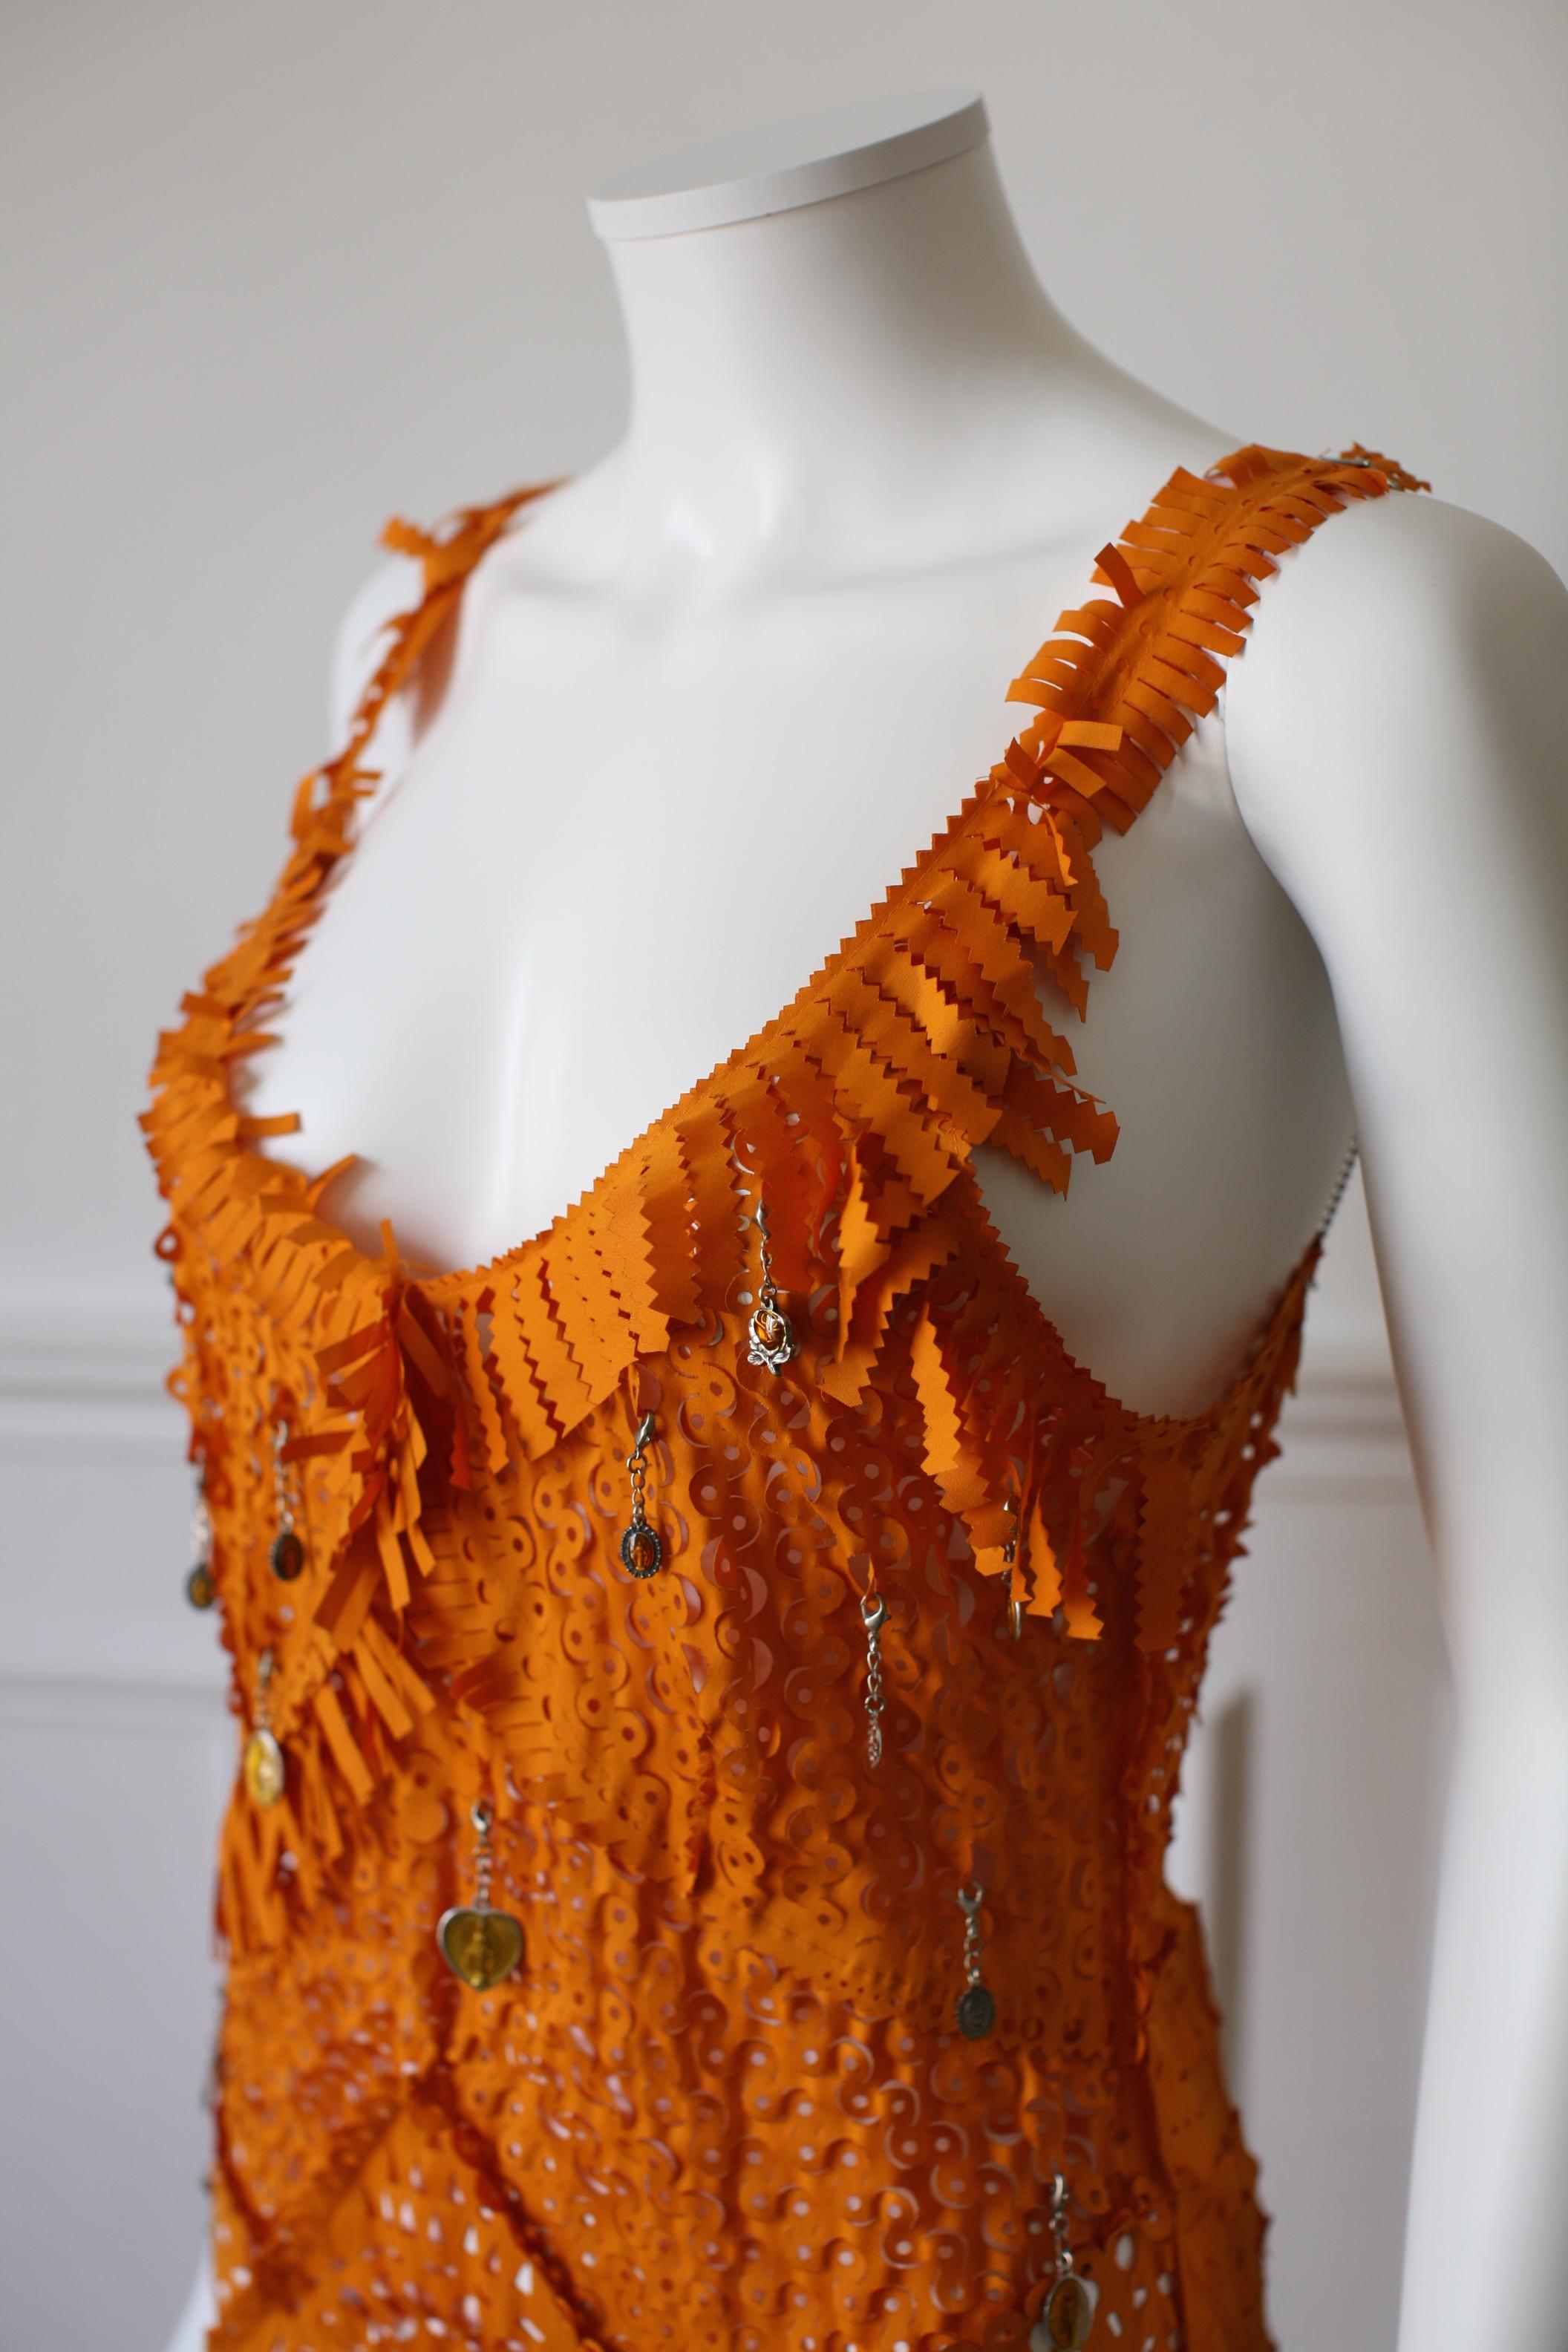 JEAN PAUL GAULTIER, Made in Italy, circa 00’s. Superb orange cotton dress with various patterns cuts in the fabric. Small religious medals are hung randomly and can be moved. The thin metal straps chains can be adjusted. There is a lacing in the